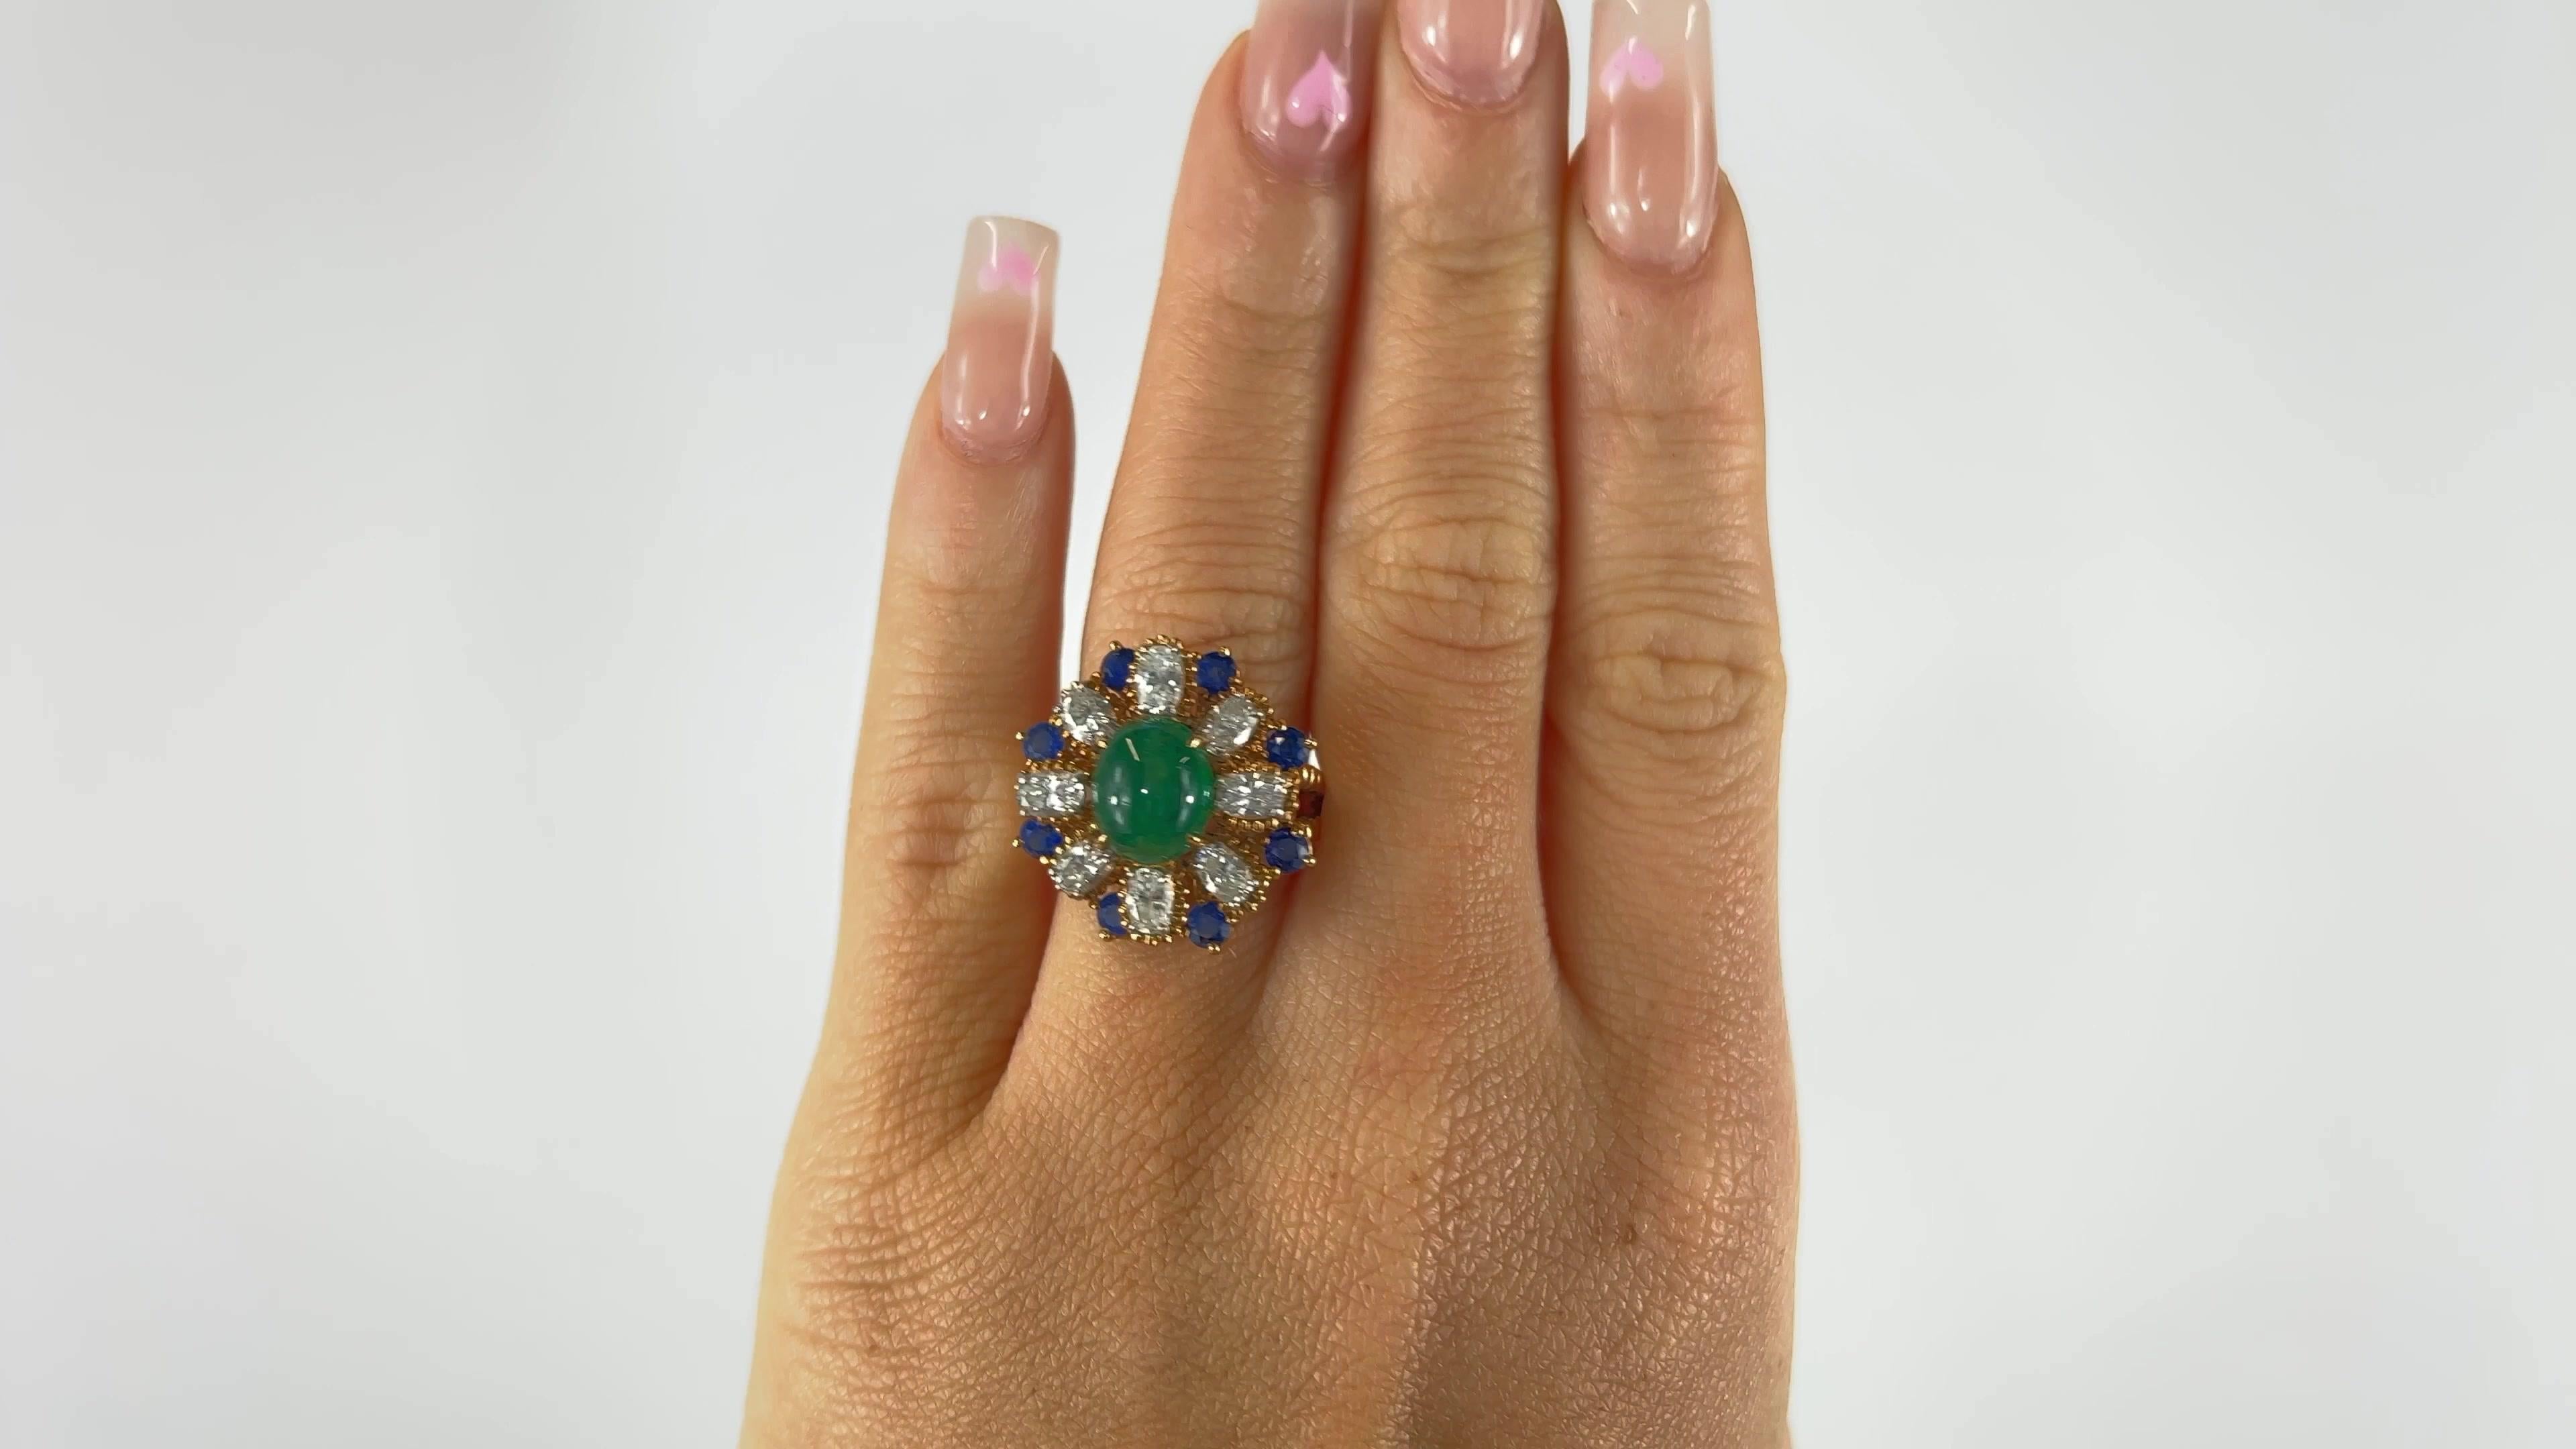 One Vintage Oscar Heyman Emerald Diamond Sapphire Cluster Cocktail Ring. Featuring one cabochon cut emerald of approximately 3.00 carats. Accented by eight oval cut diamonds with a total weight of approximately 2.00 carats, graded E-F color, VS